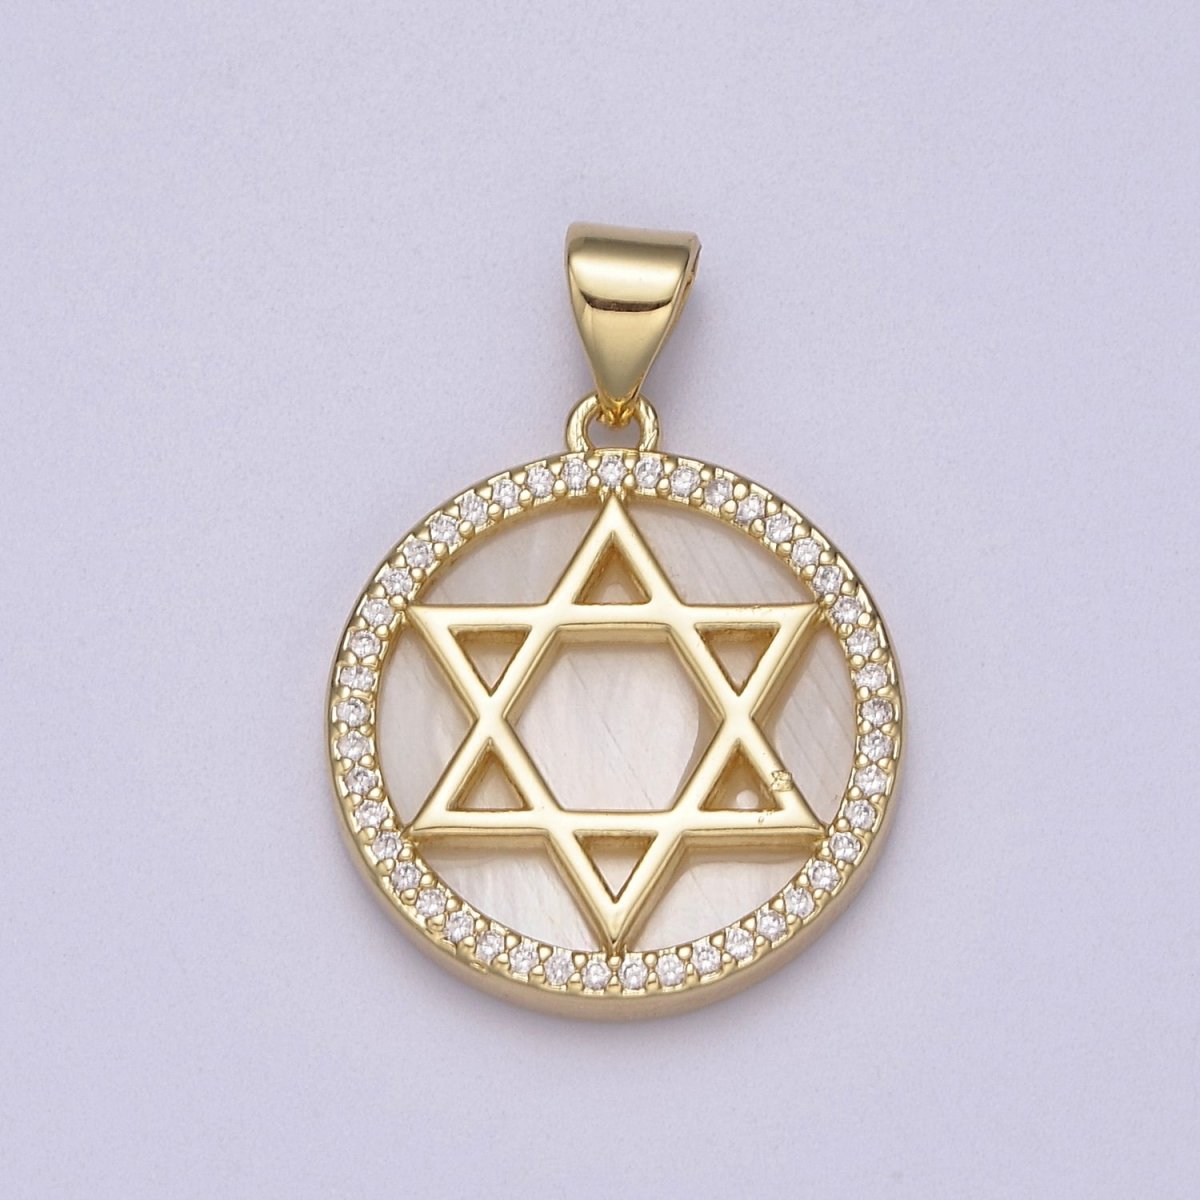 Gold Star David Pearl Medallion Pendant Round Disc Religious Jewish Jewelry for Necklace Earring Charm J-413 J-414 - DLUXCA